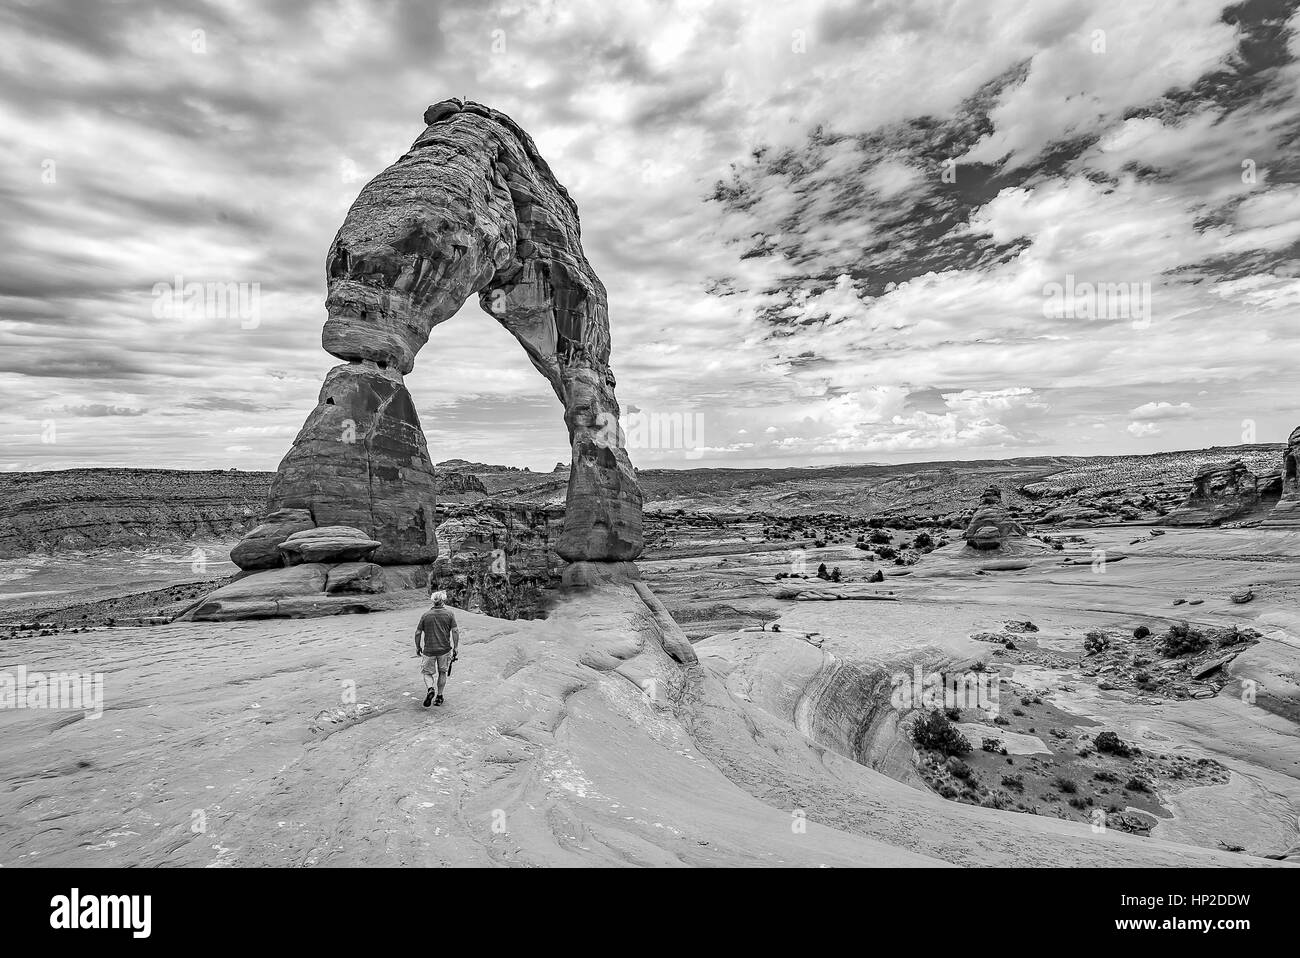 Adventurer hiking to Delicate Arch at Arches National Park Utah. Black and White Landscape photography Stock Photo